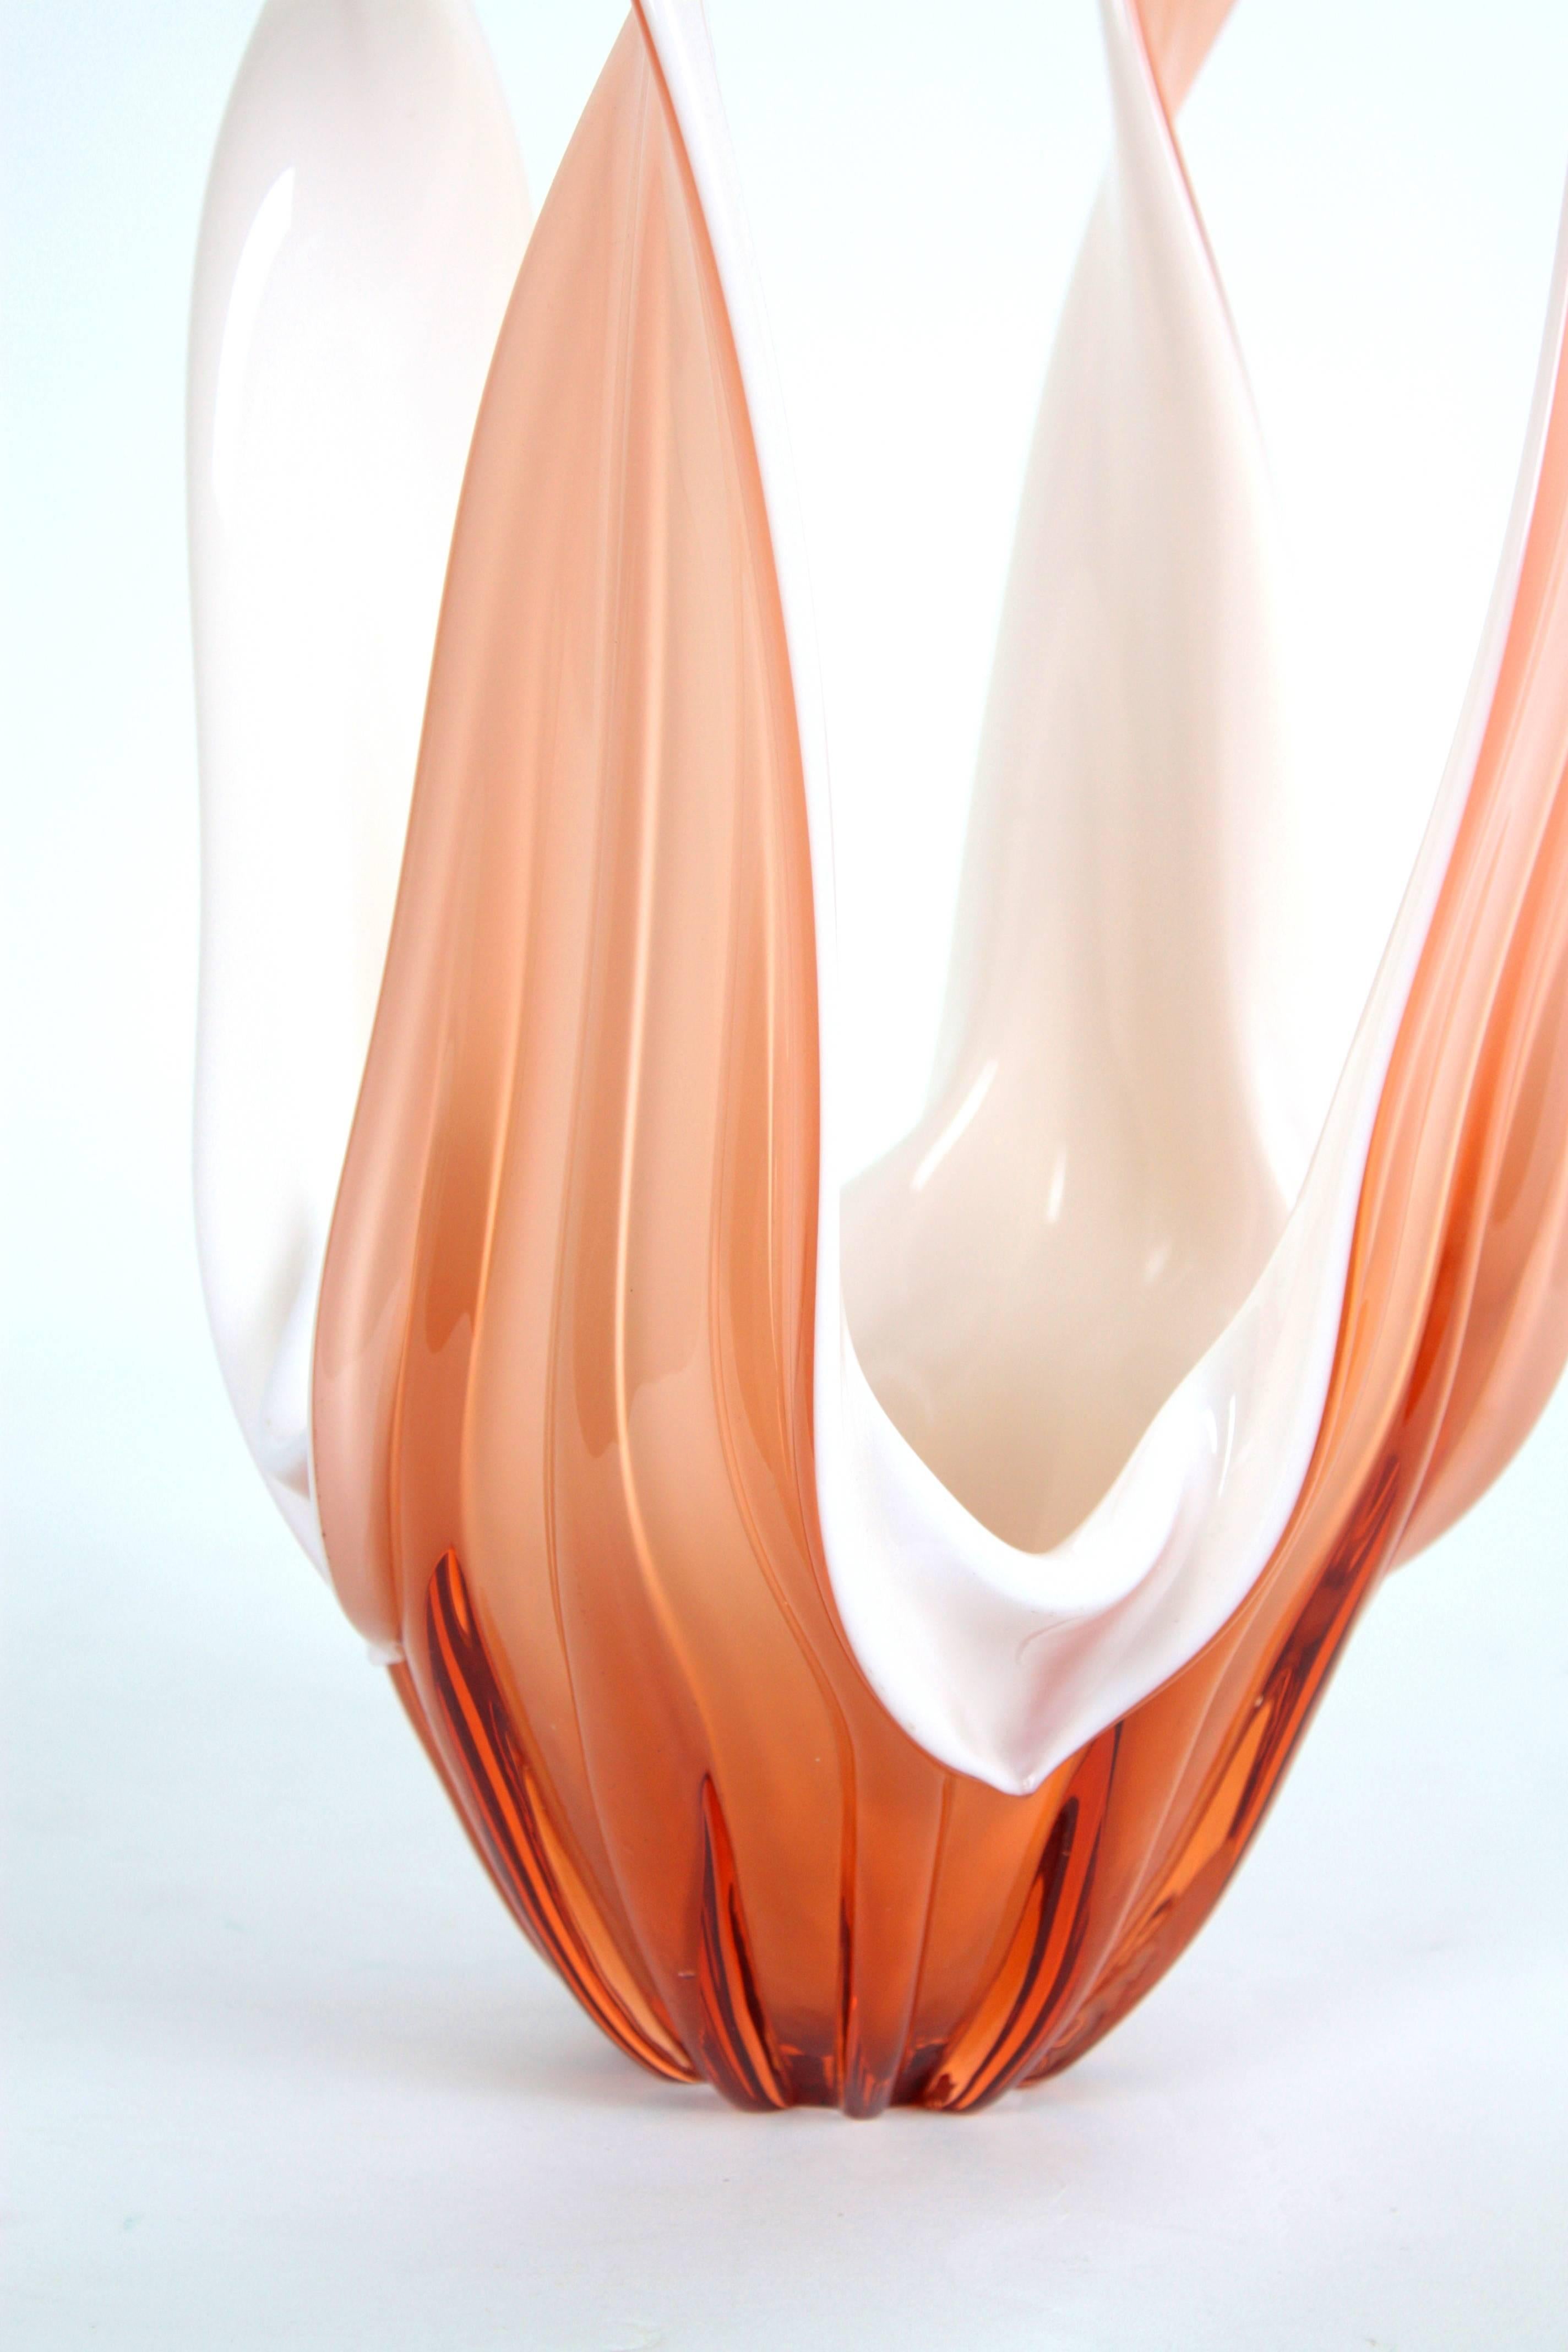 20th Century Murano Centerpiece Vase in Peach and Opal White Glass, 1960s For Sale